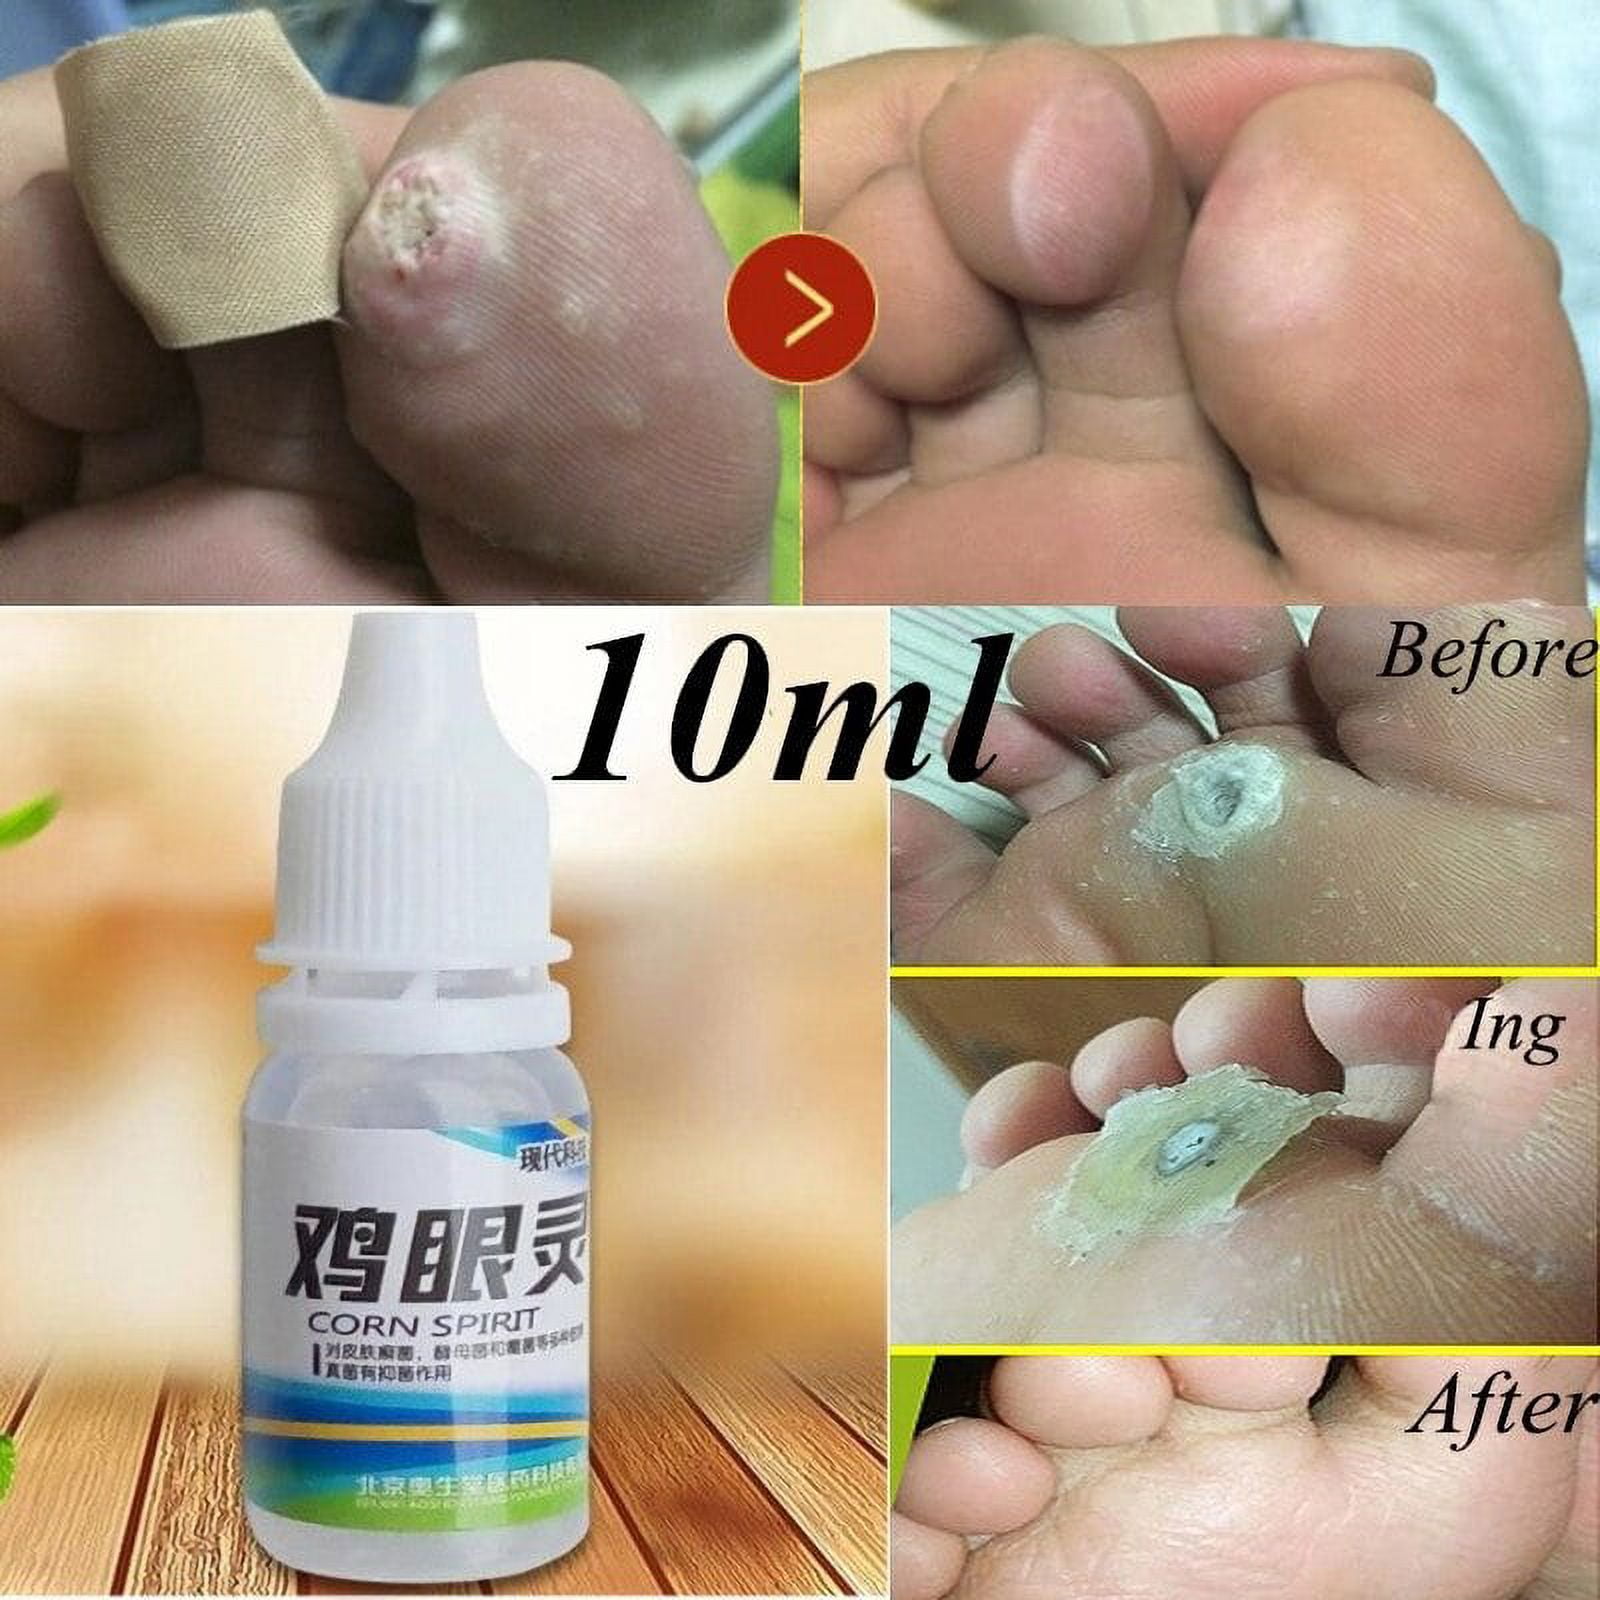 7 Quick Ways To Get Rid of Foot Calluses and Corns – Callus Performance